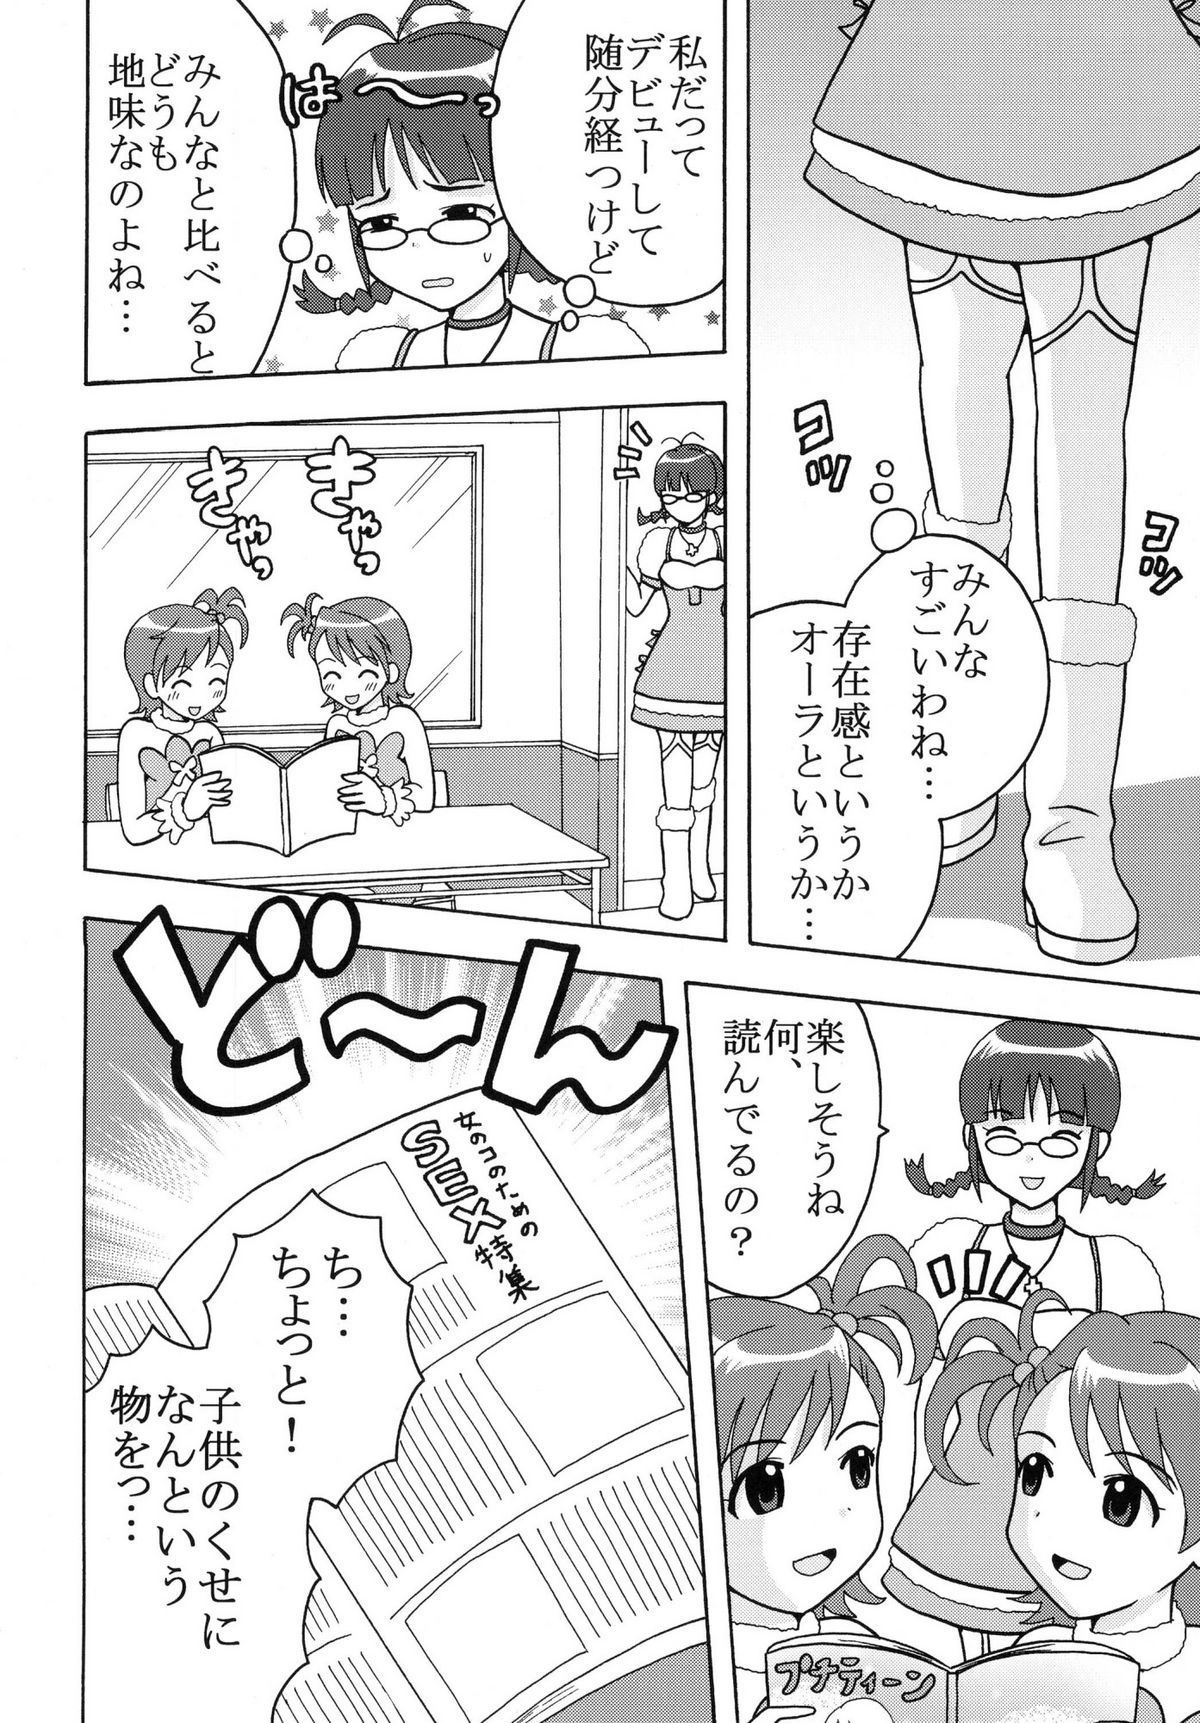 (C77) [St. Rio (Various)] The Idolm@meister Deculture Stars 2 (THE iDOLM@STER) page 4 full